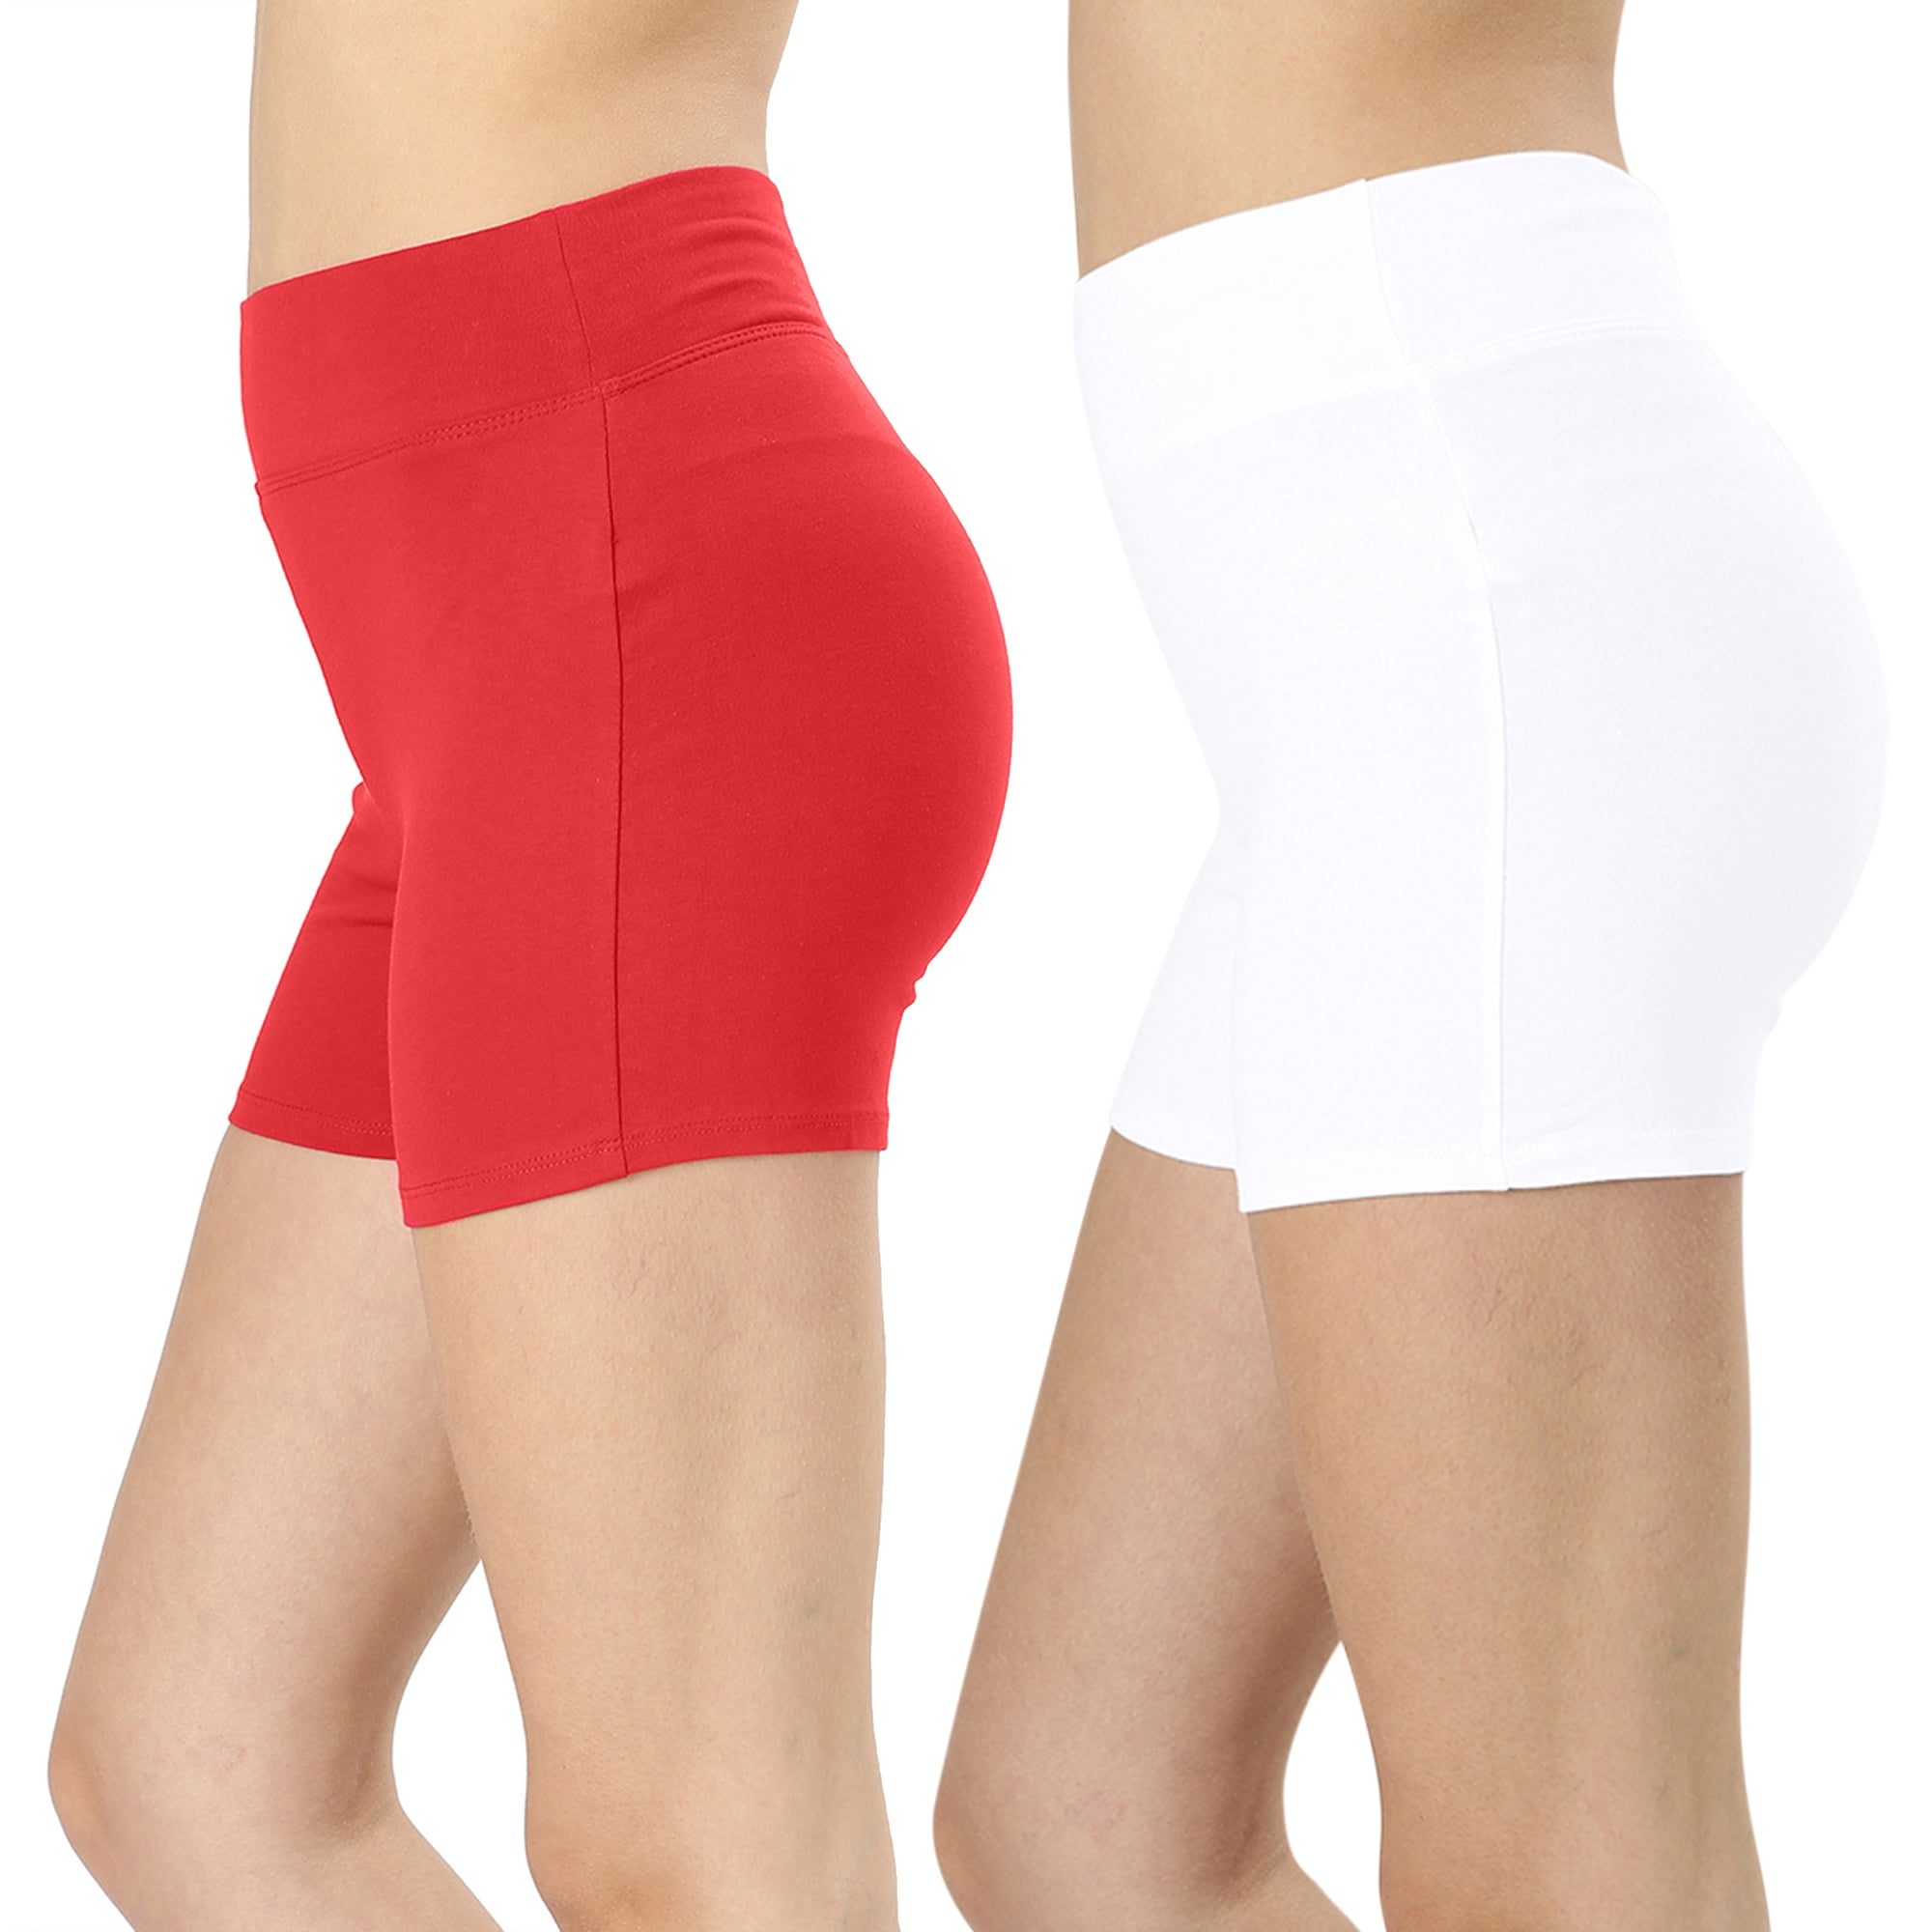 Womens And Plus Soft Cotton Stretch High Waist Sports Short Pants With Wide Waist Band 2pk Red